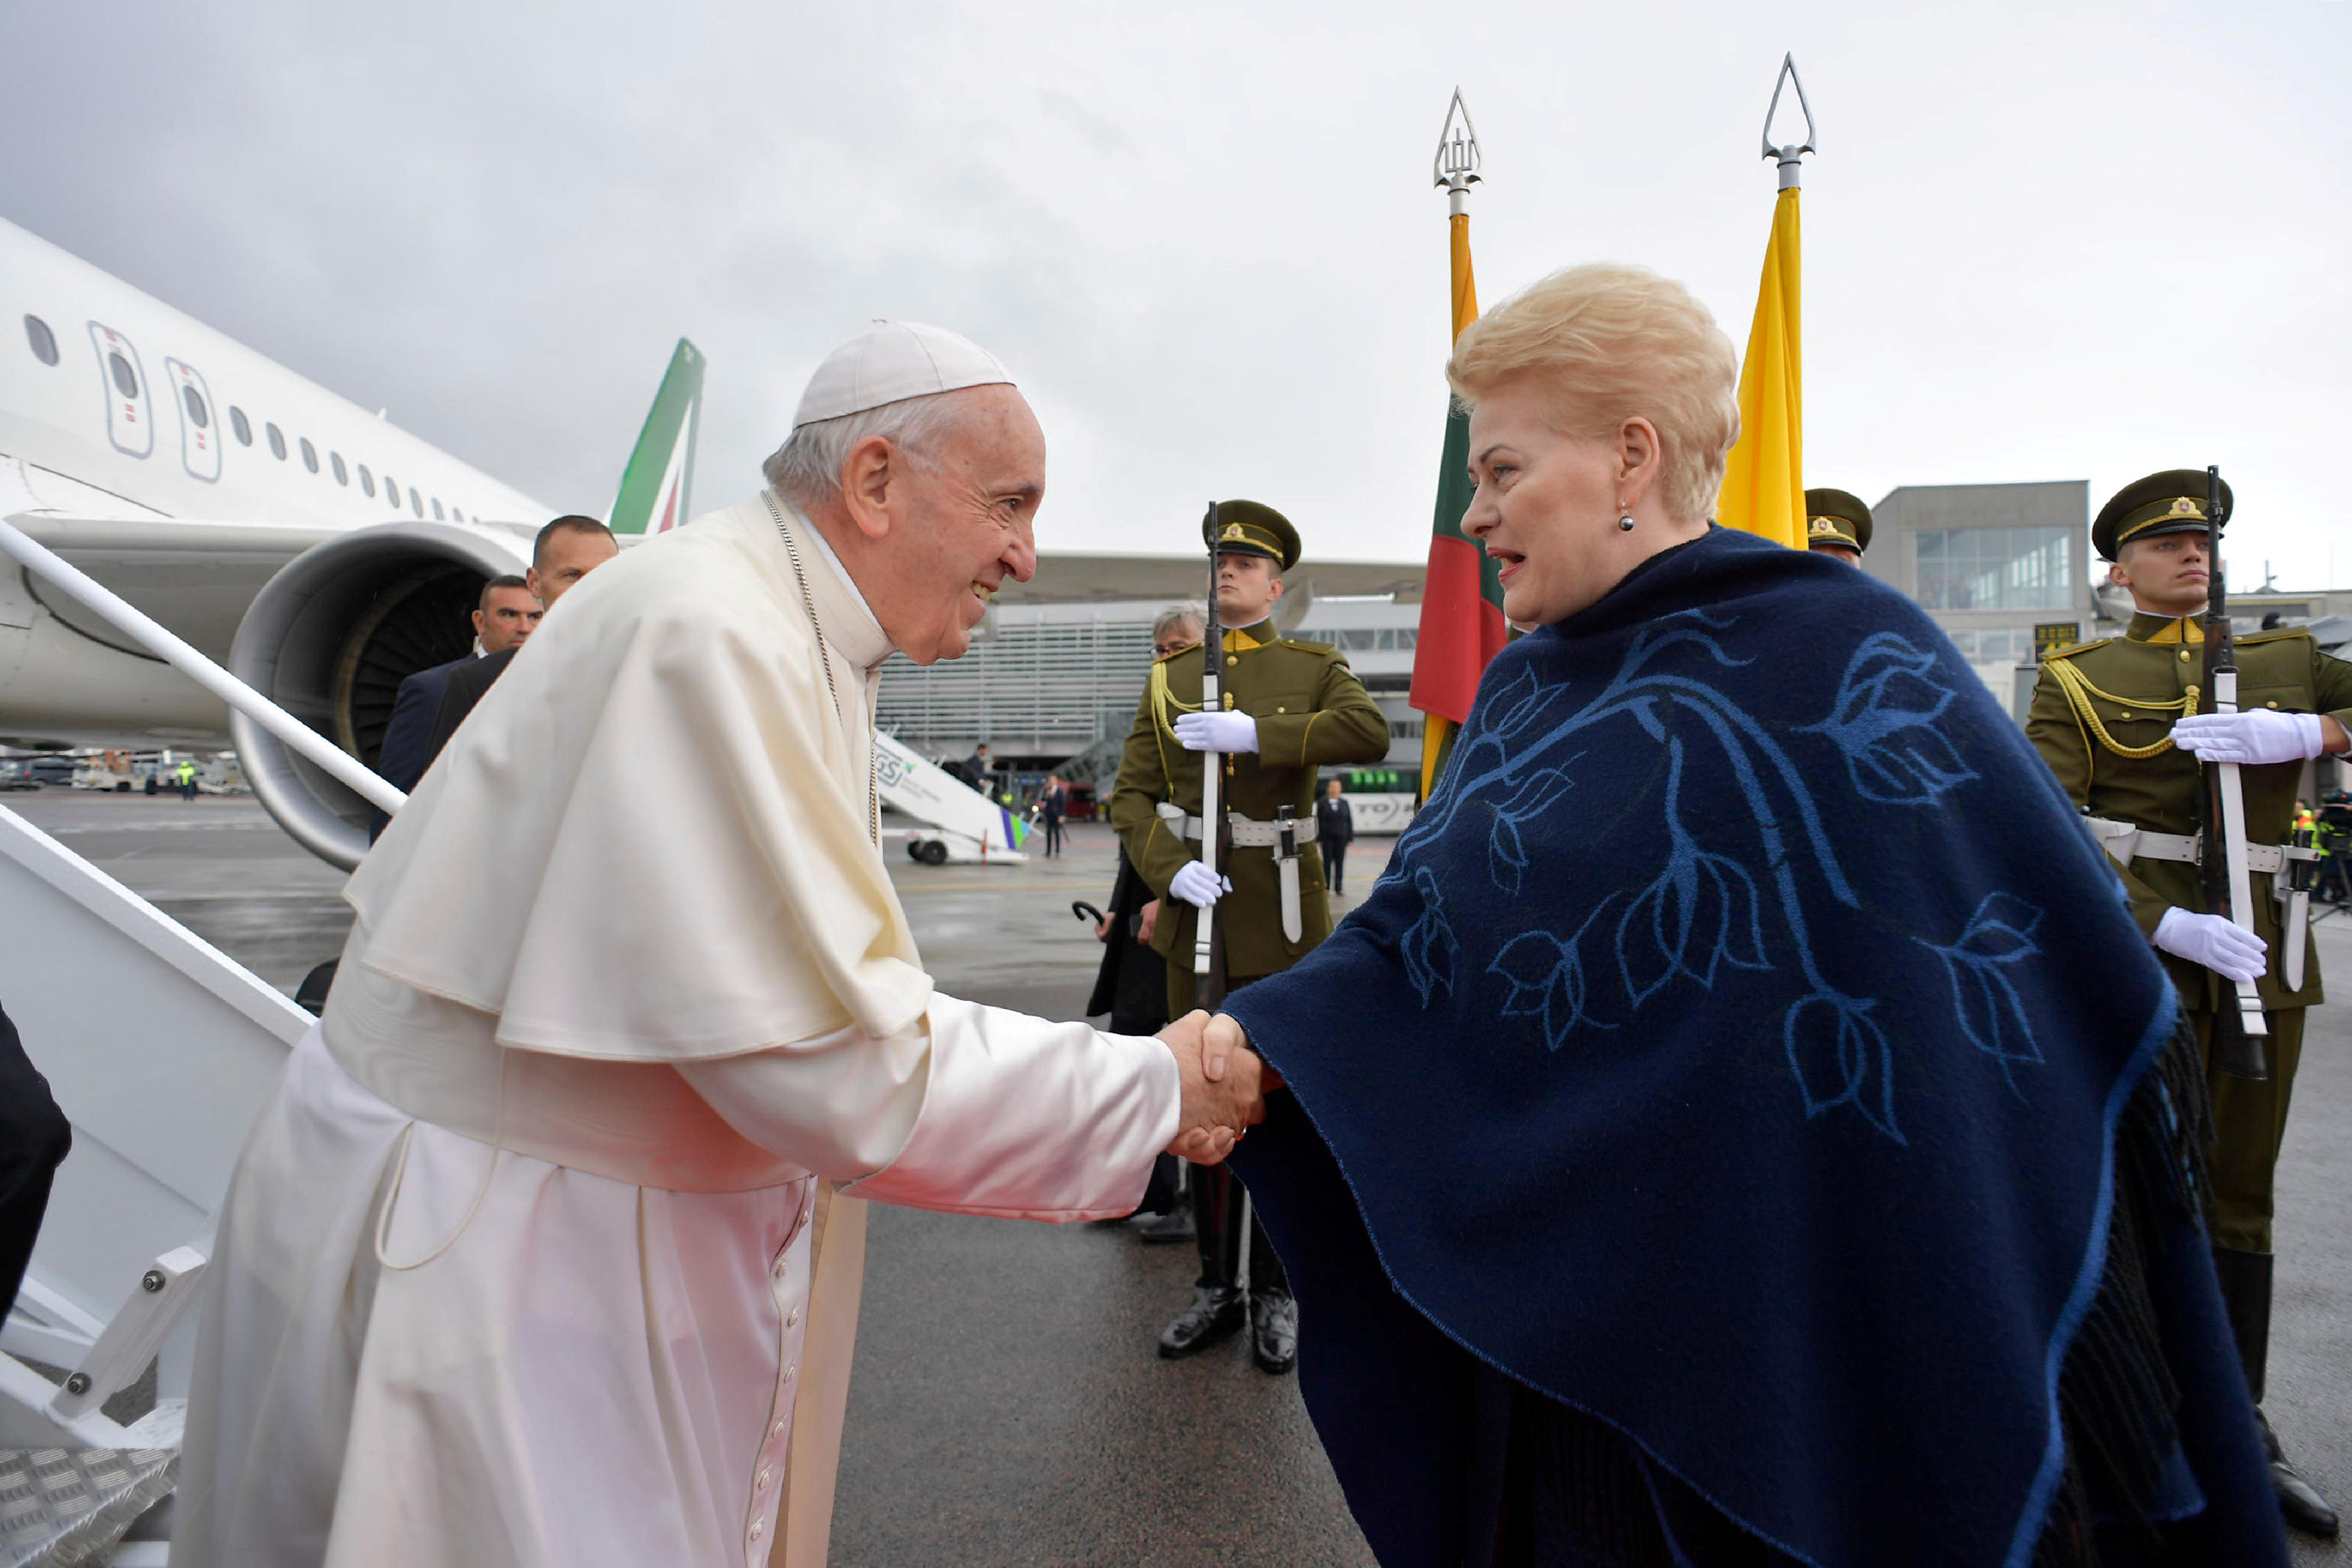 2018-09-22T093522Z_118677257_RC125A9DB550_RTRMADP_3_POPE-BALTIC-LITHUANIA-WELCOME